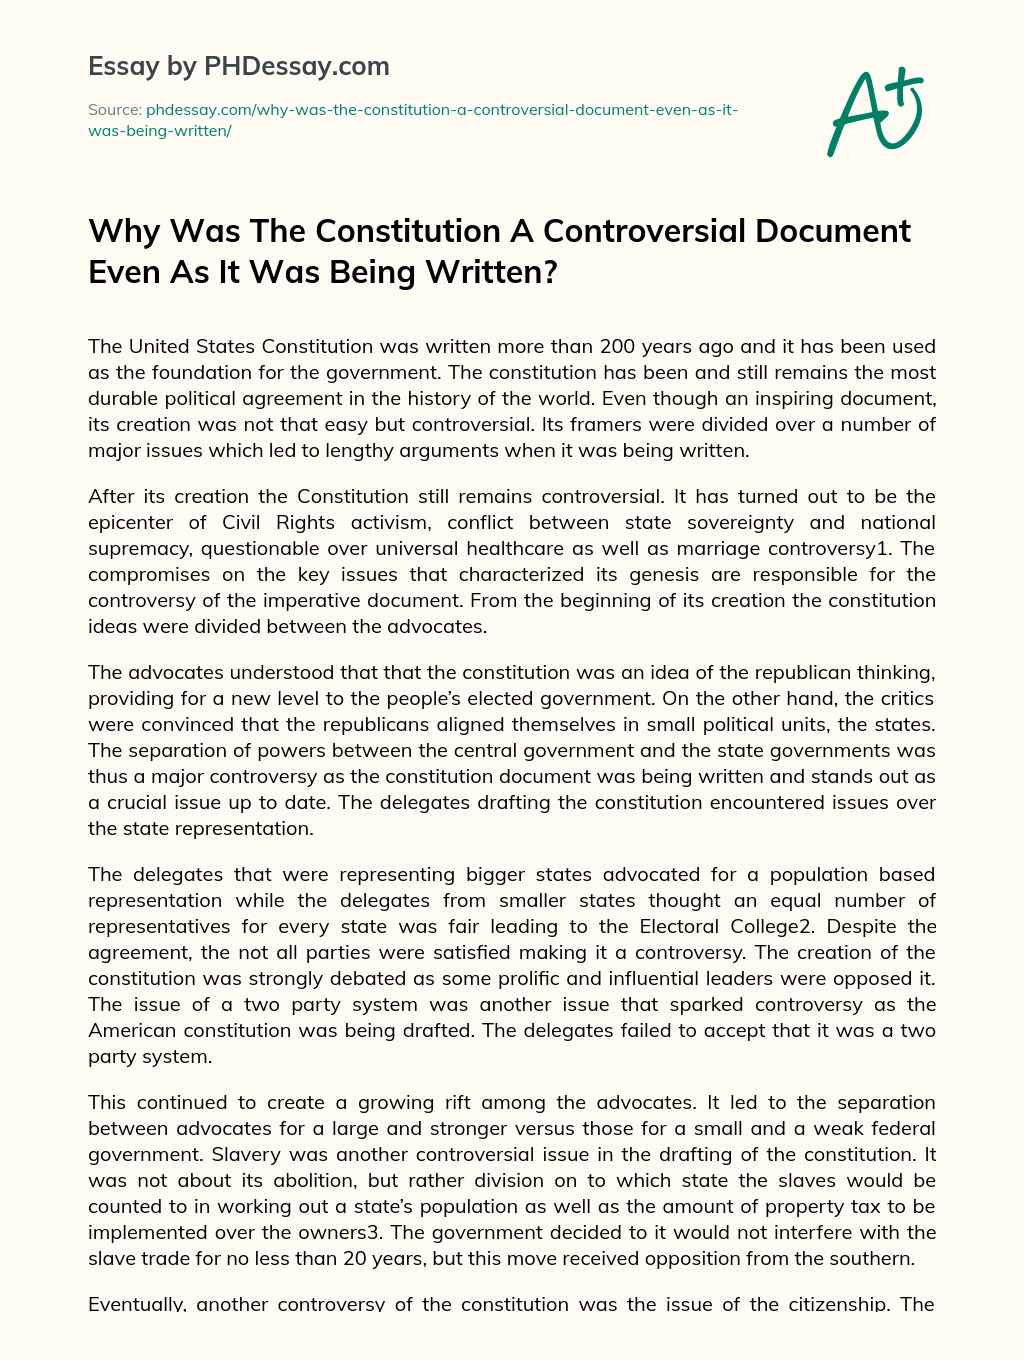 Why Was The Constitution A Controversial Document Even As It Was Being Written?